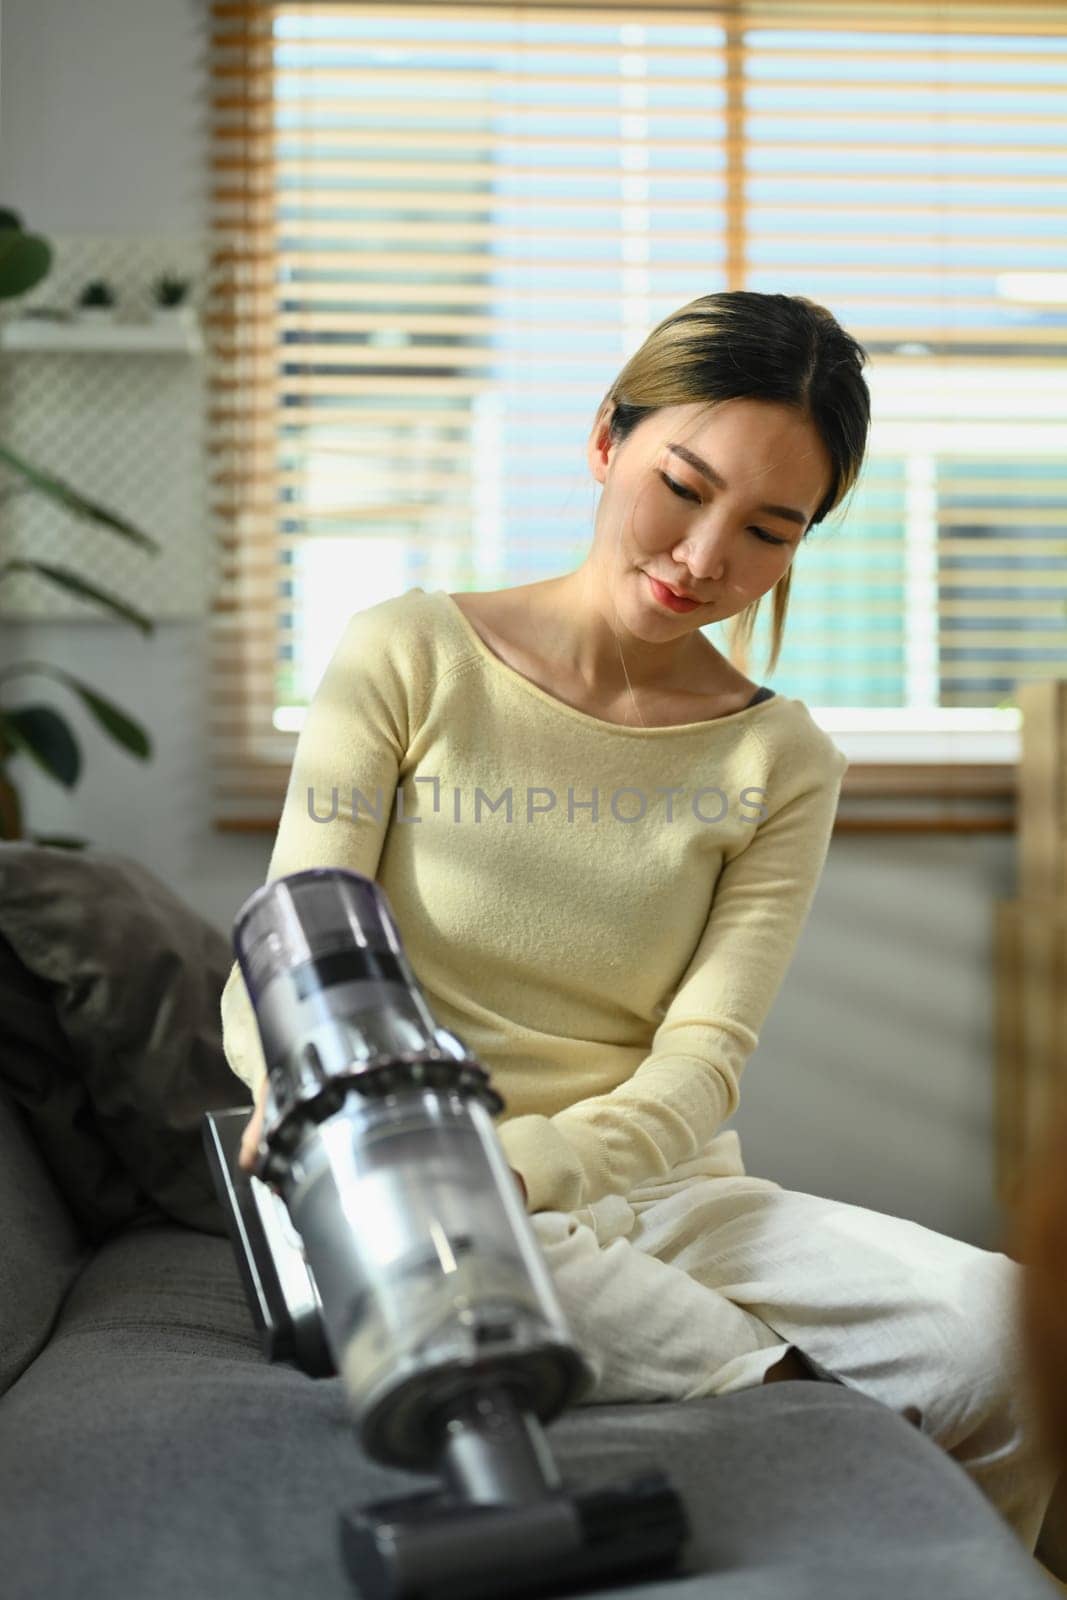 Image of asian female housewife vacuuming sofa with cordless handheld vacuum cleaner. Housework concept.